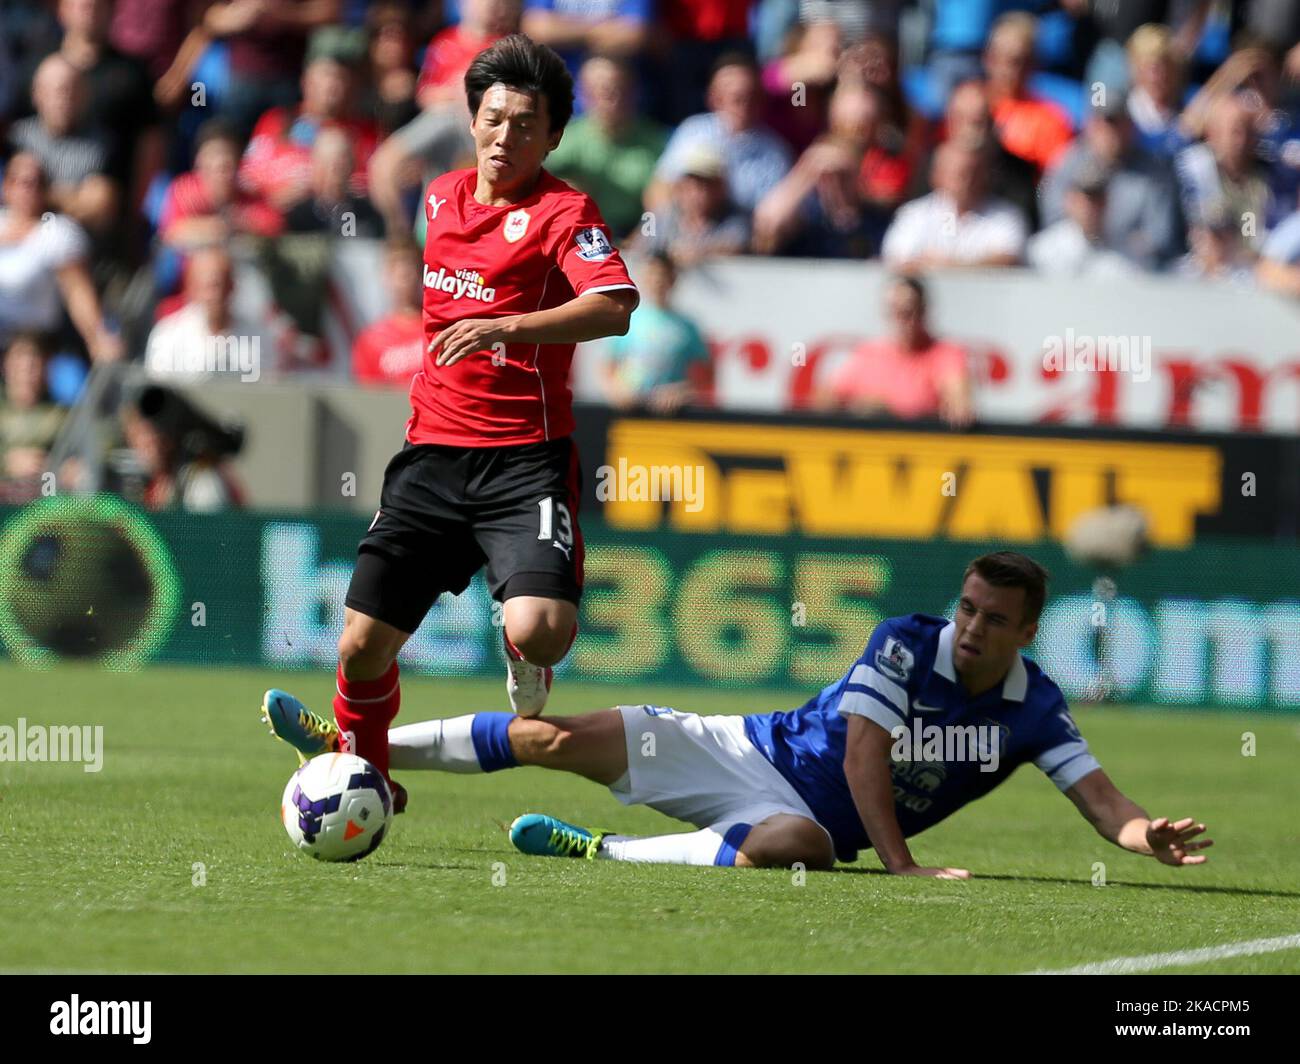 31st August 2013- Barclays Premiership - Cardiff City Vs Everton -  Kim Bo-Kyung of Cardiff City is fouled by Seamus Coleman of Everton - Photo: Paul Roberts/Pathos. Stock Photo